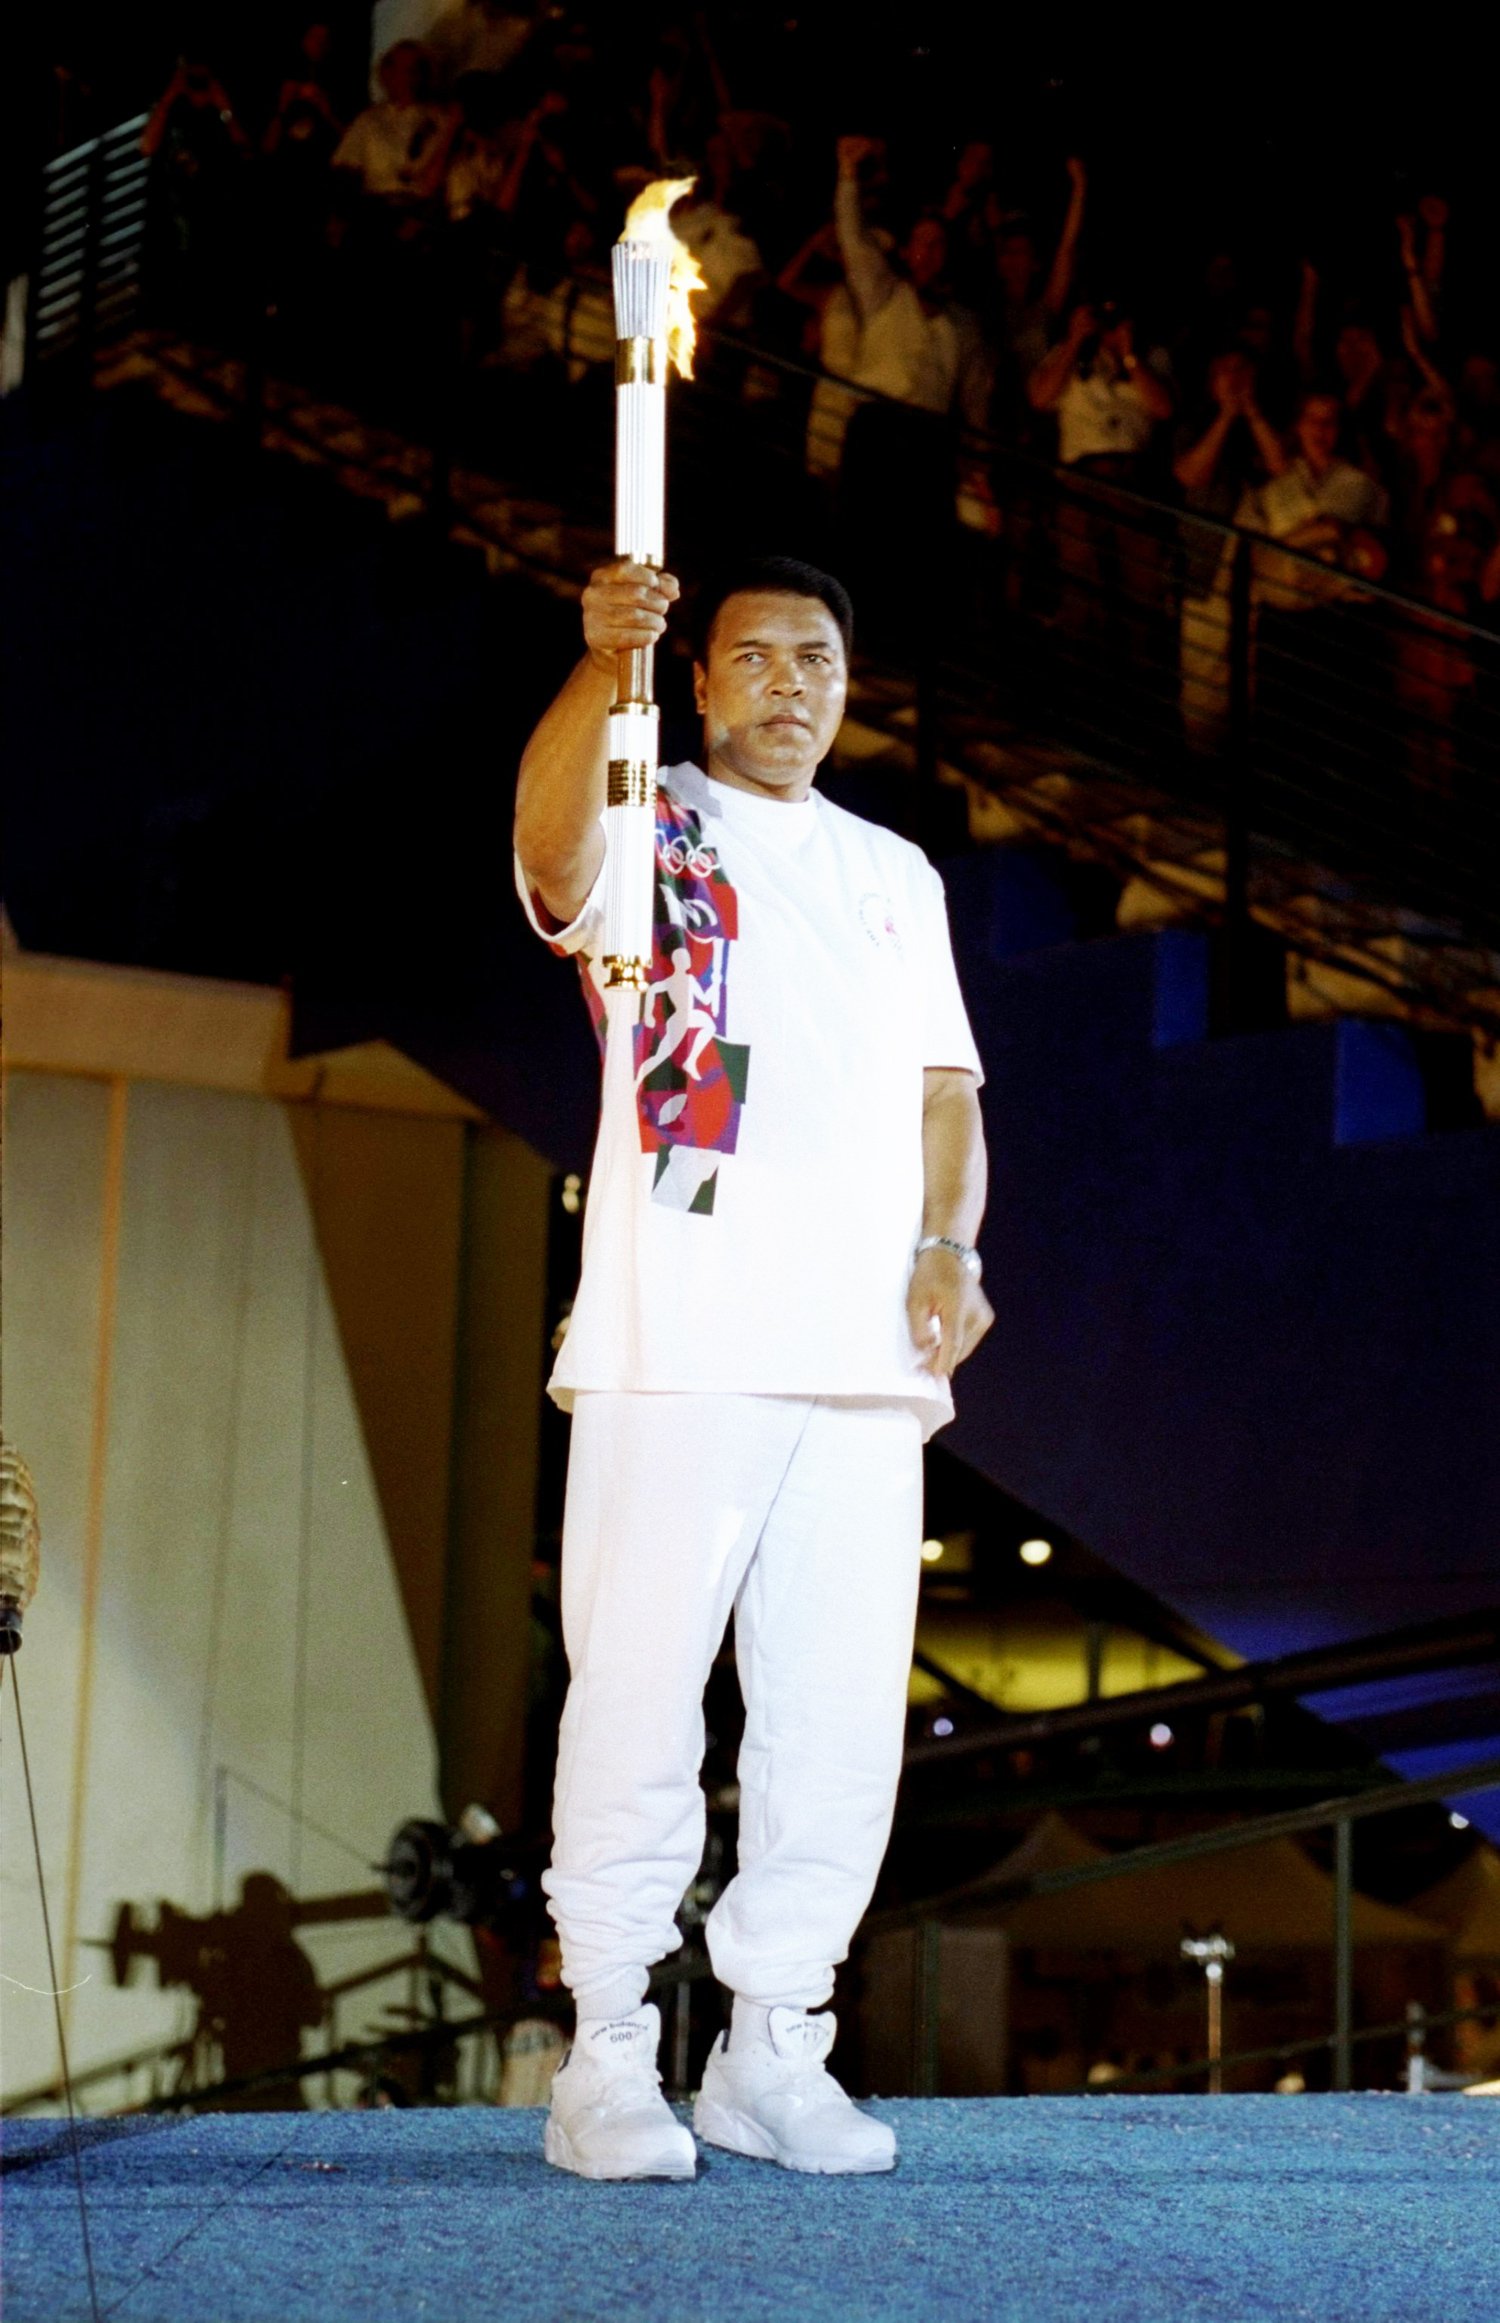 Muhammad Ali Lights the Olympic Torch, 1996